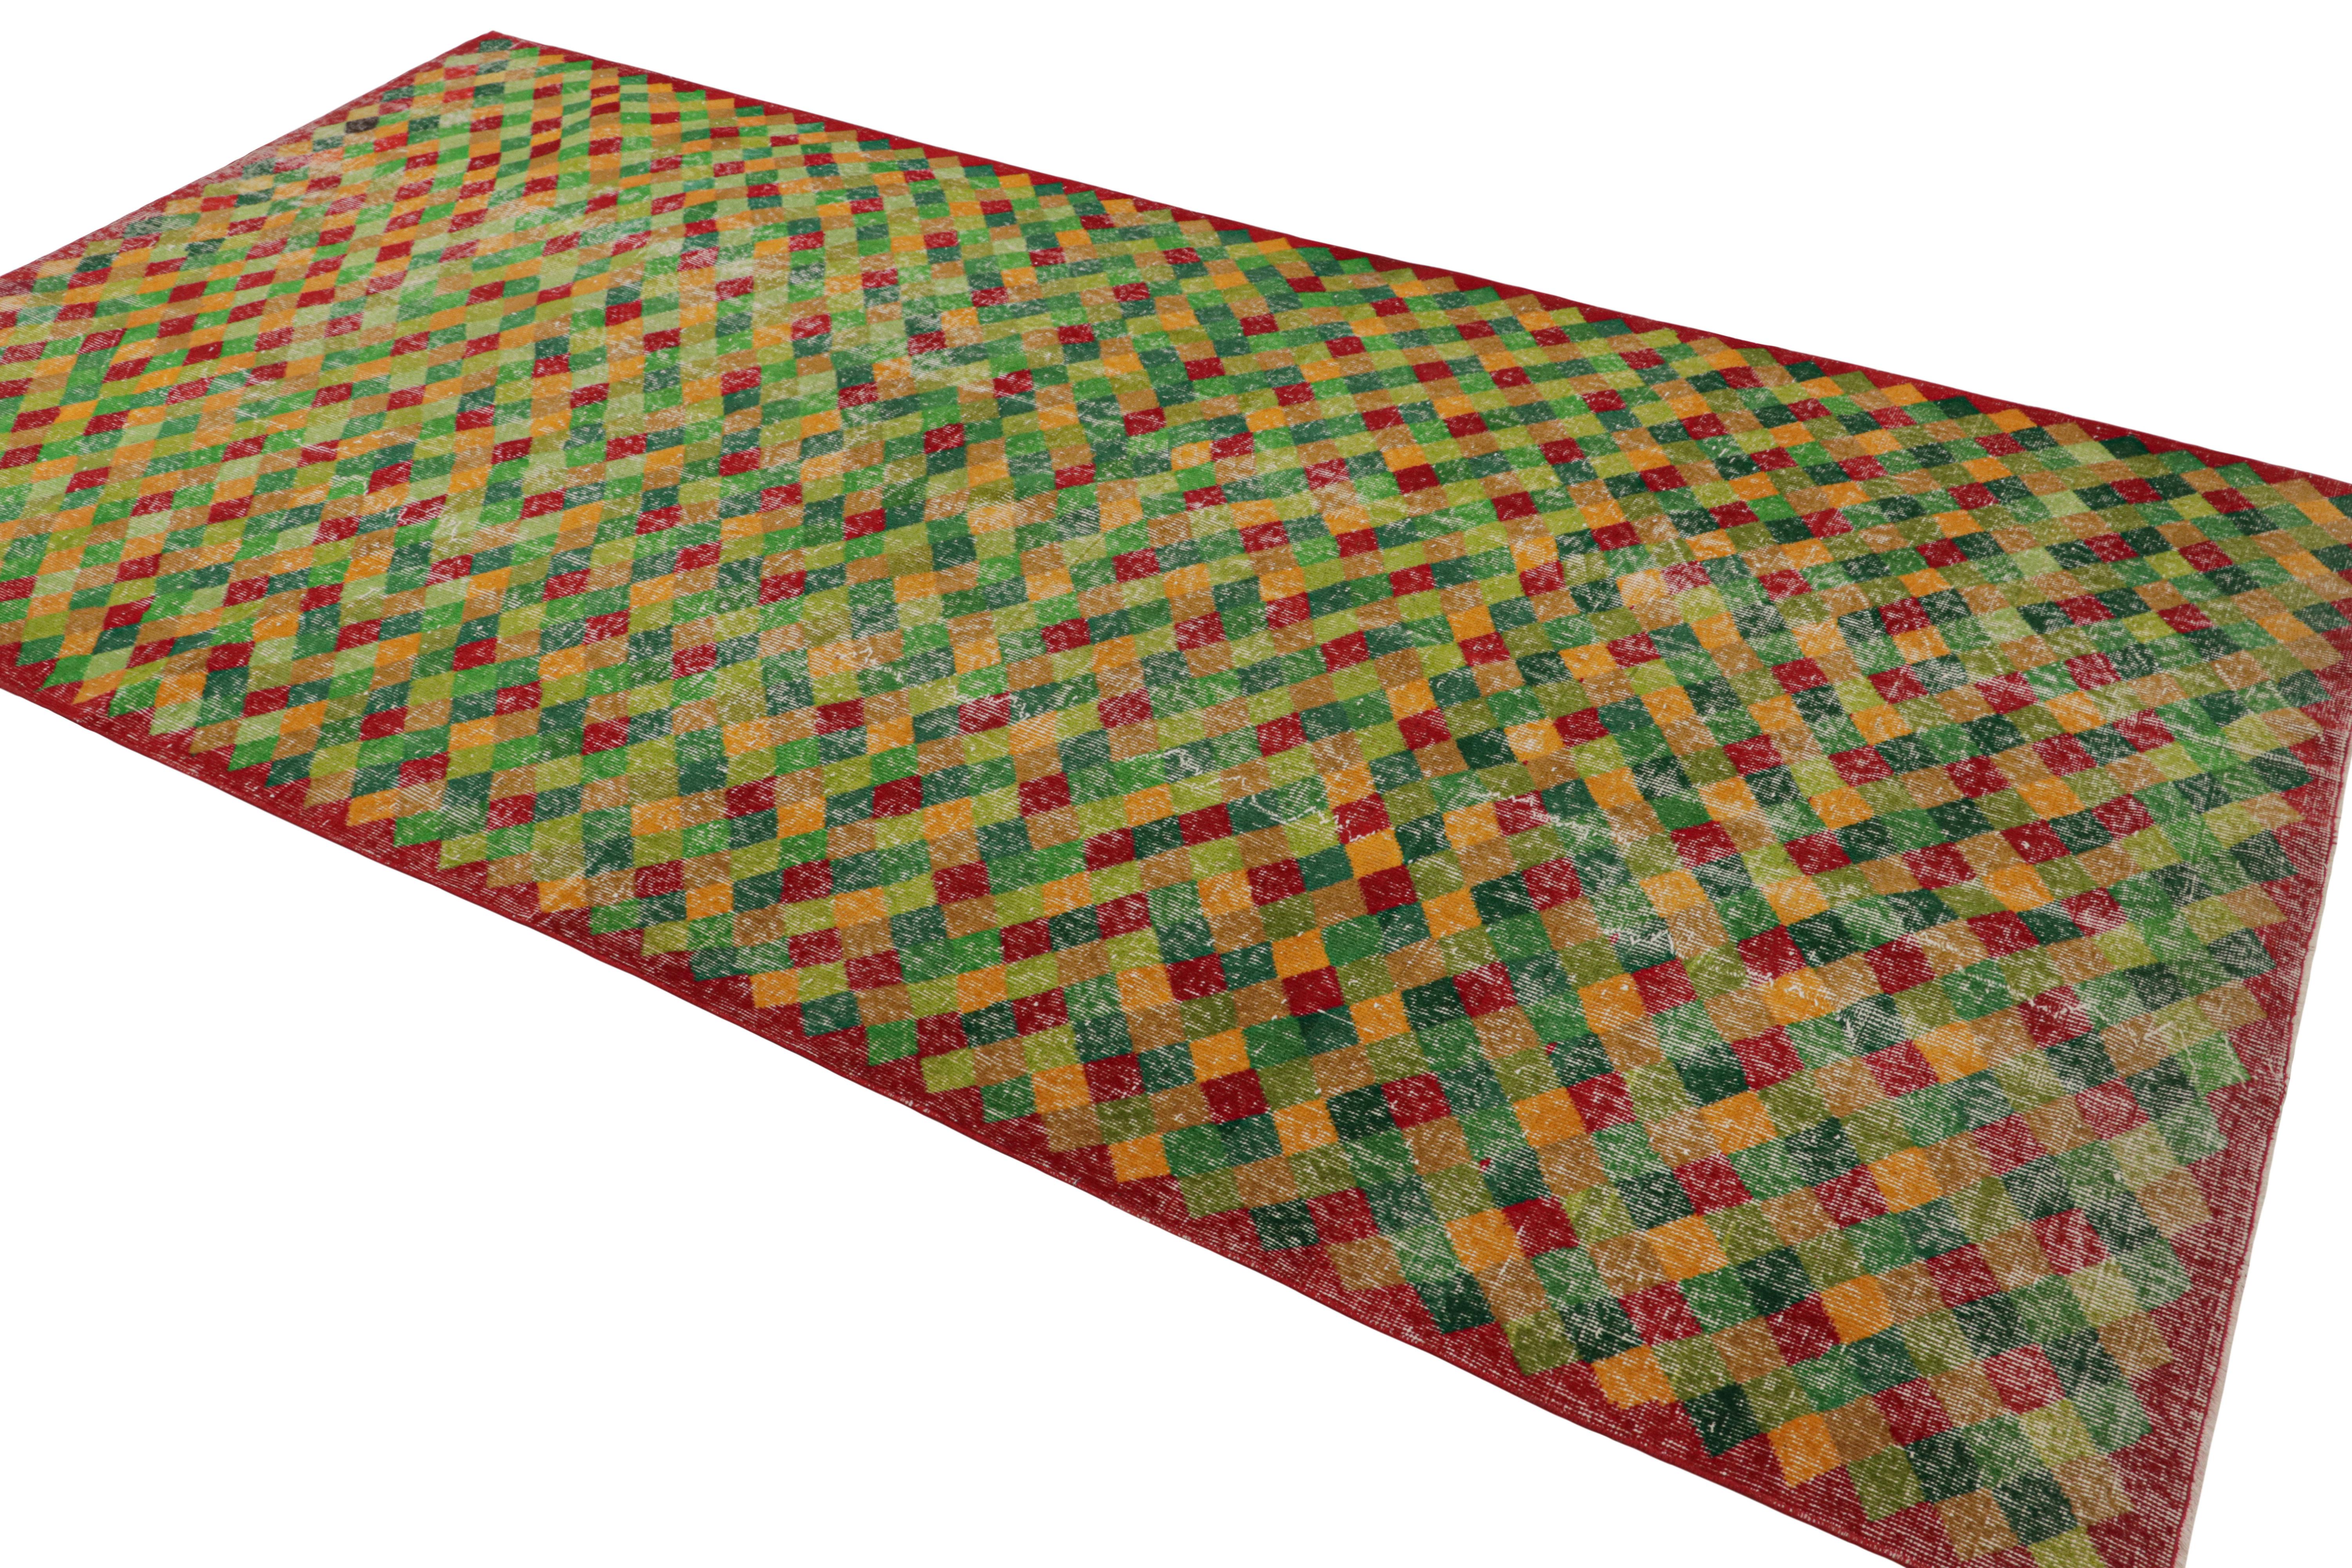 Turkish 1960s Vintage Art Deco Rug in Green Yellow, Red Geometric Pattern by Rug & Kilim For Sale